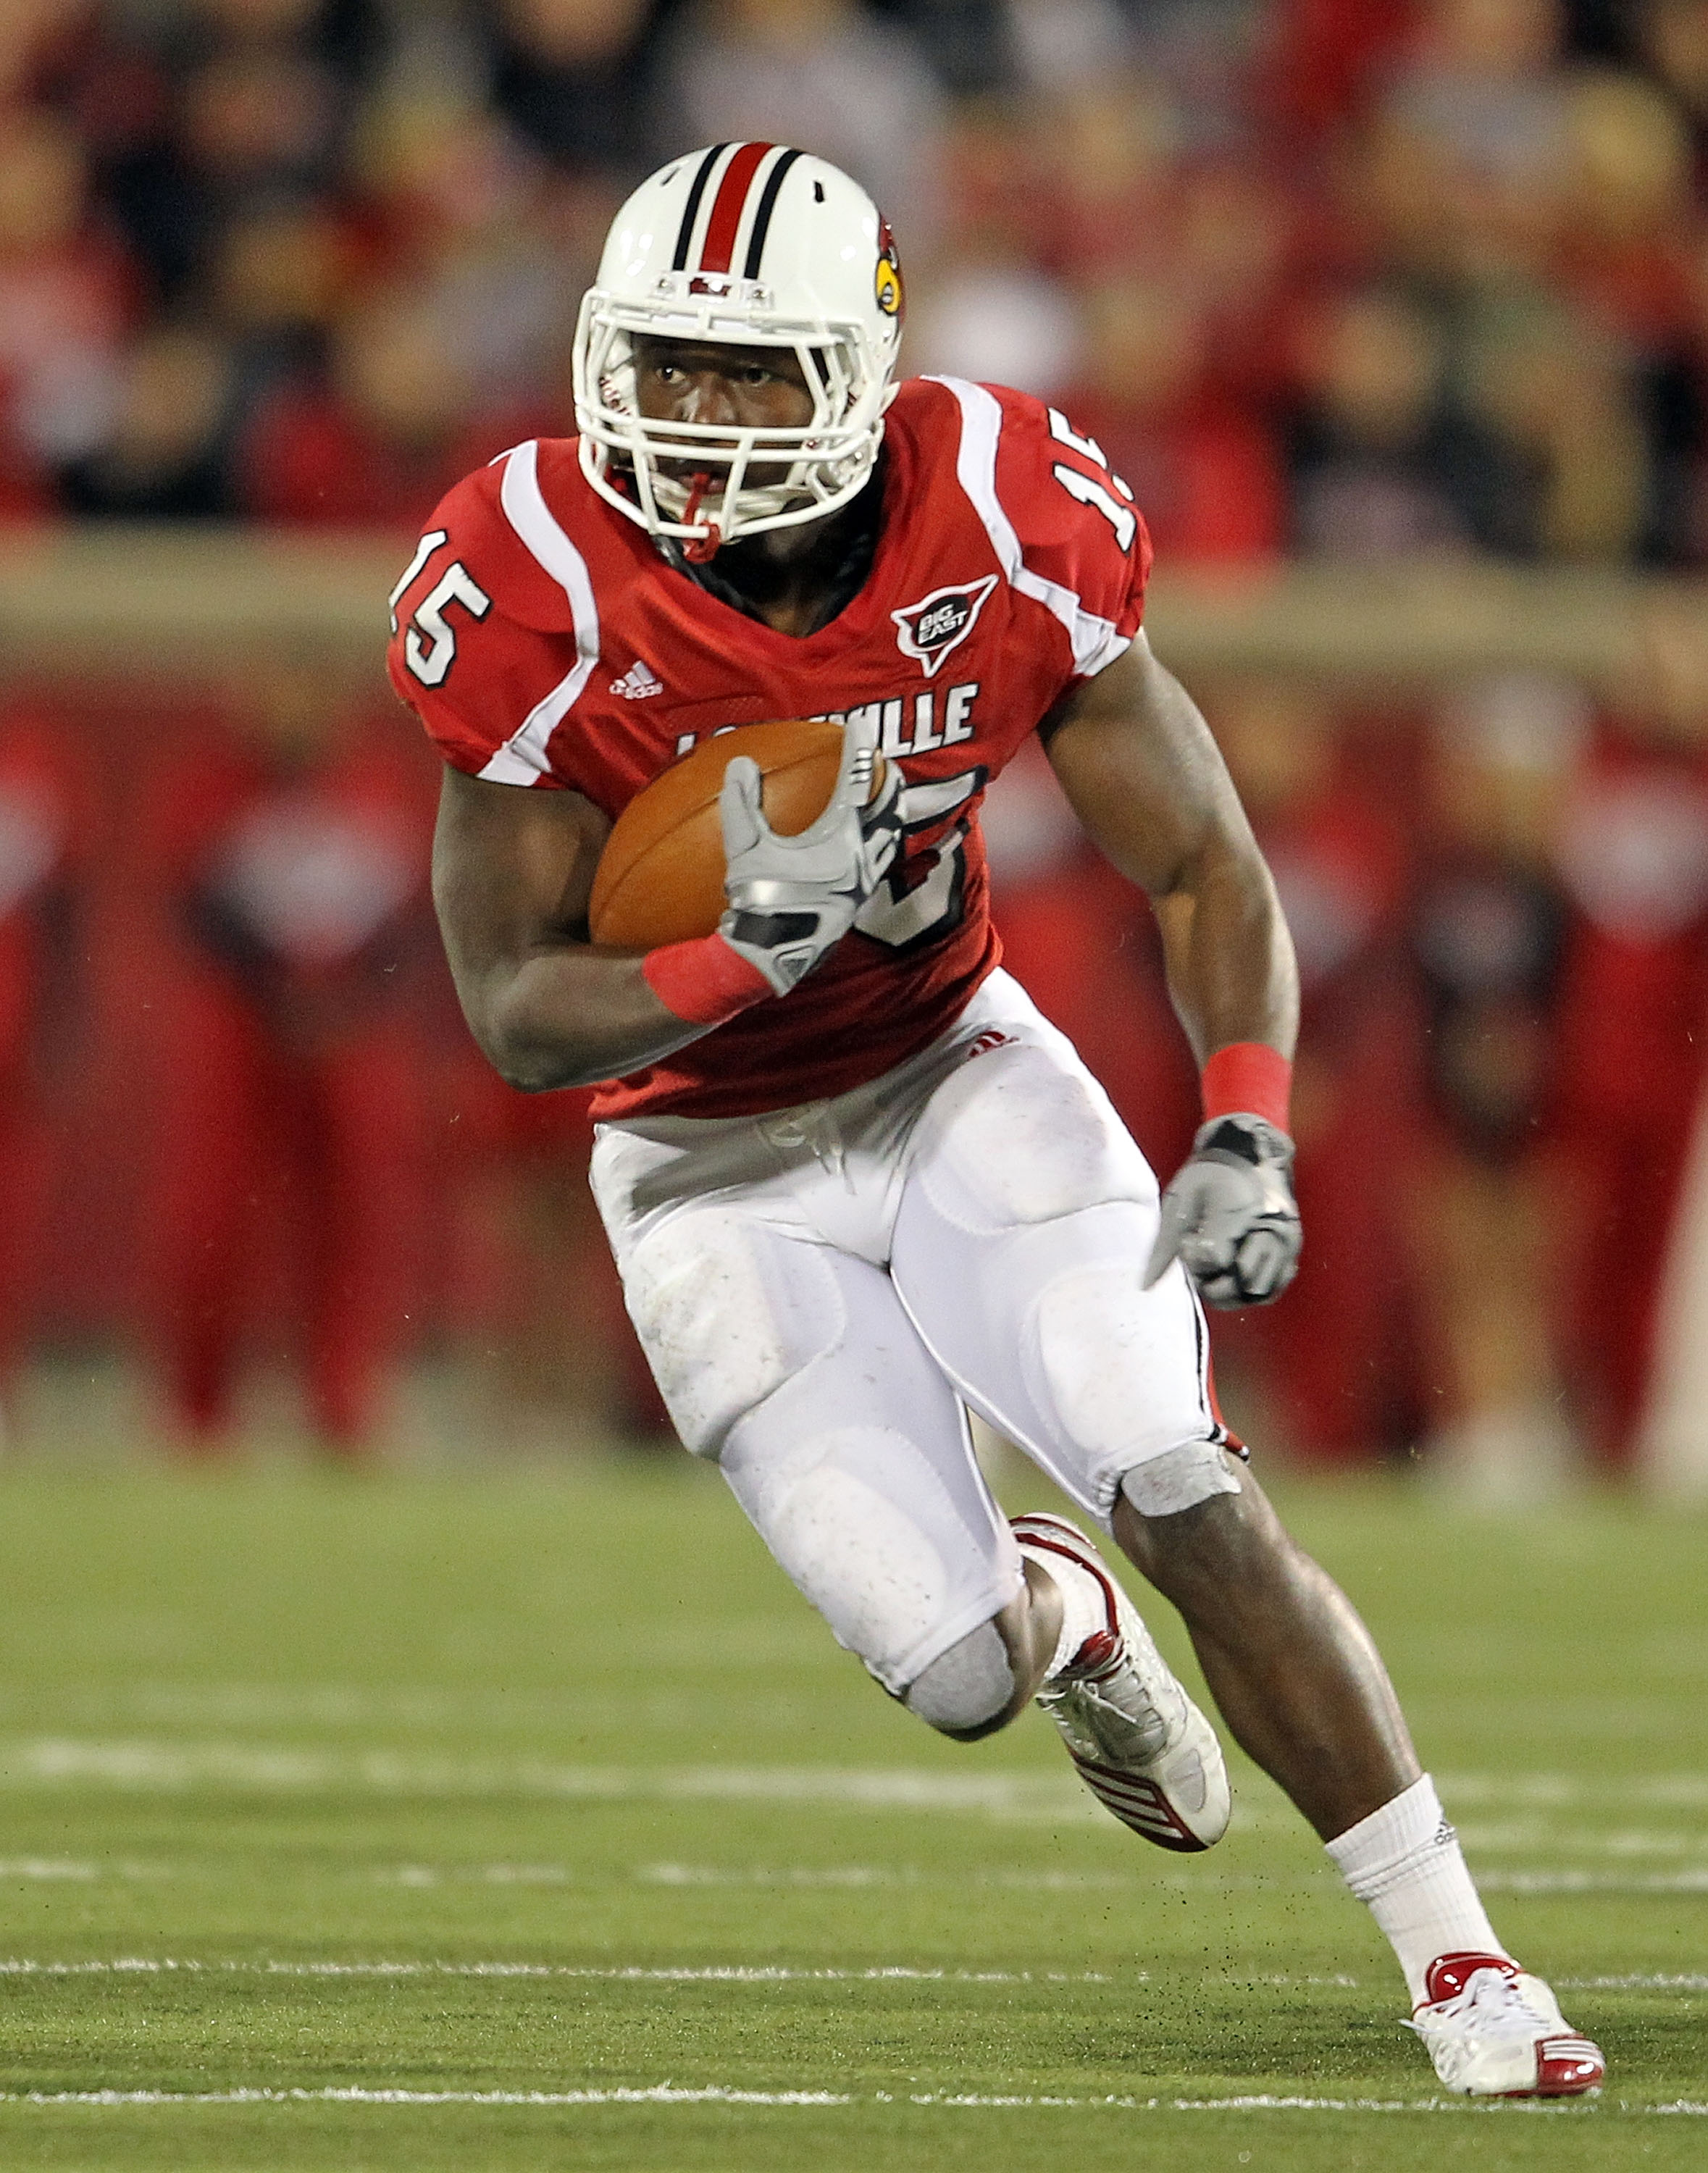 LOUISVILLE, KY - OCTOBER 15:  Bilal Powell #15 of  the Louisville Cardinals runs with the ball during the Big East Conference game against the Cincinnati Bearcats at Papa John's Cardinal Stadium on October 15, 2010 in Louisville, Kentucky.  (Photo by Andy